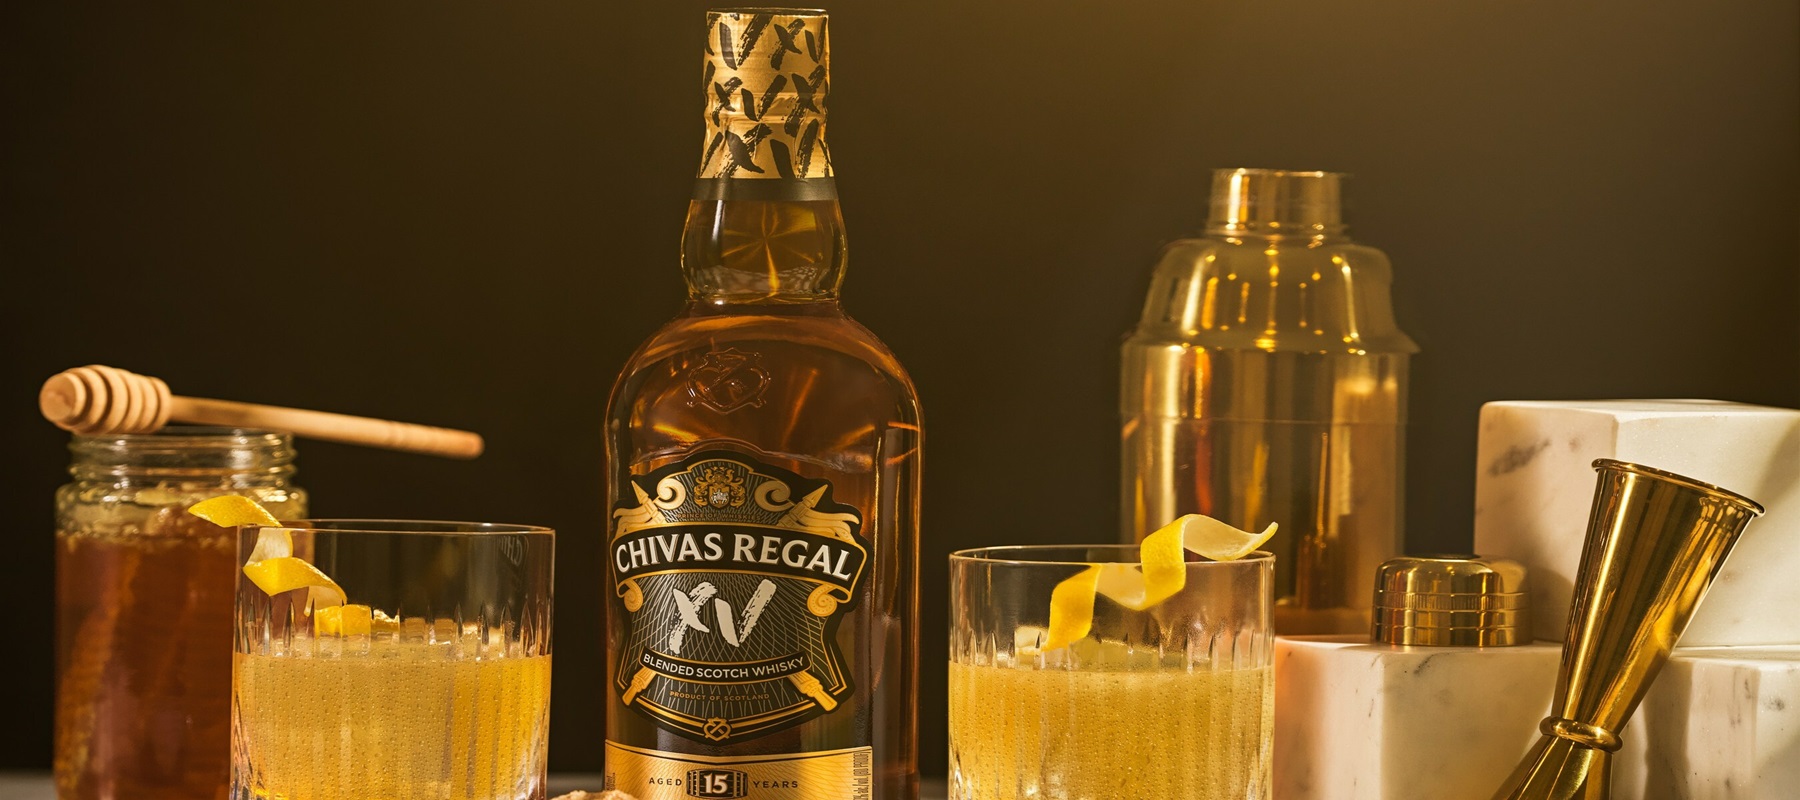 Chivas Regal launches ad campaign in US celebrating the power of shared success